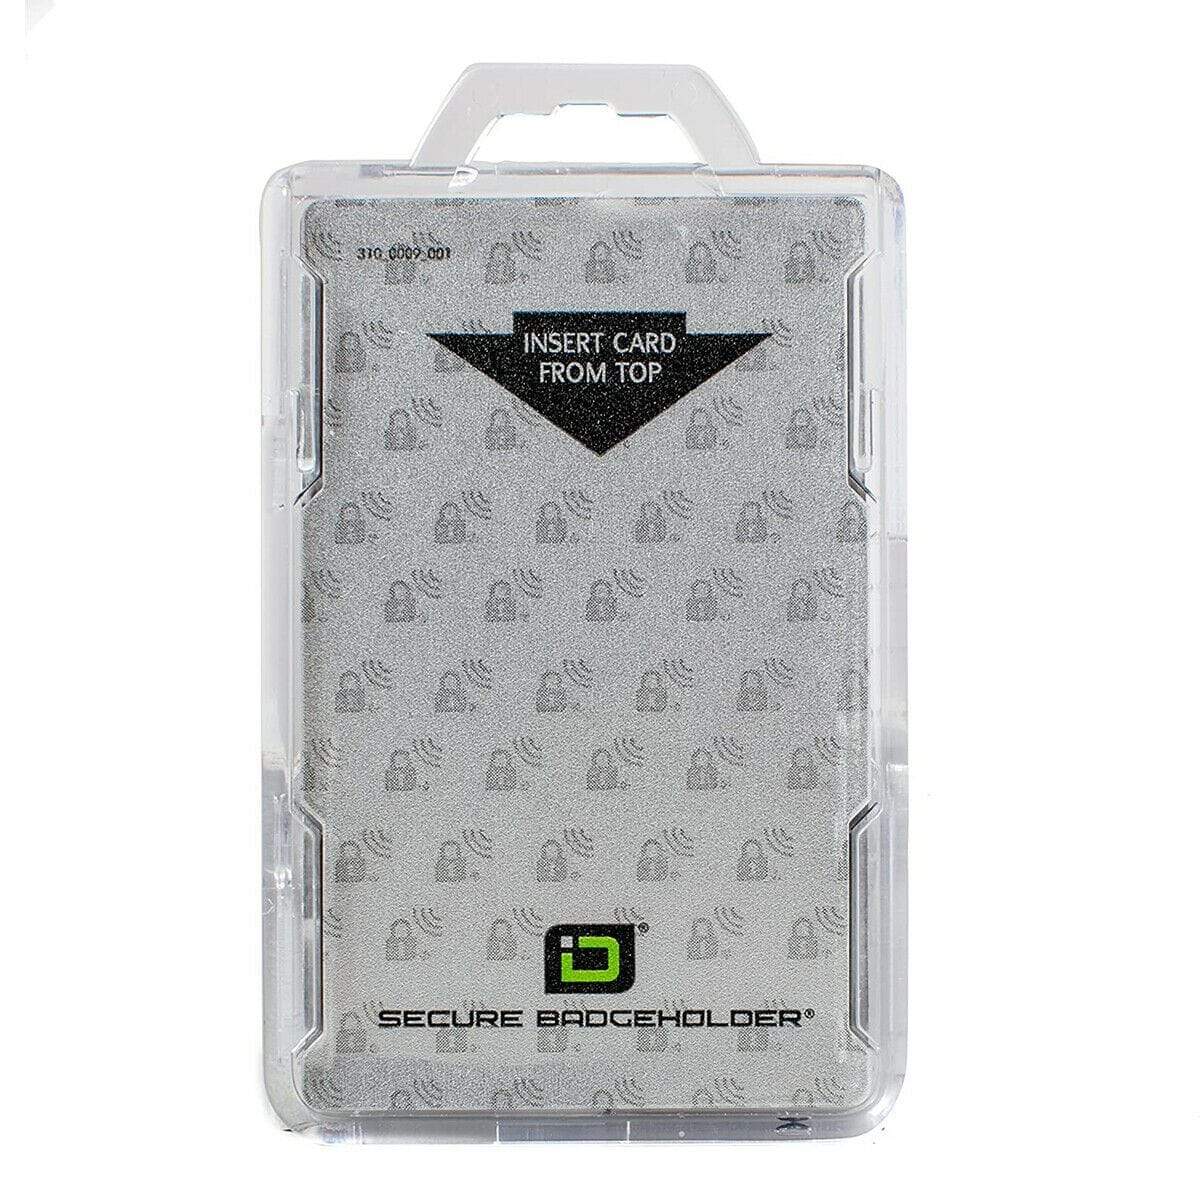 Translucent White (clear) Identity Stronghold RFID Blocking Secure ID Badgeholder DuoLite (IDSH2004-001B) IDSH2004-001B-CLEAR